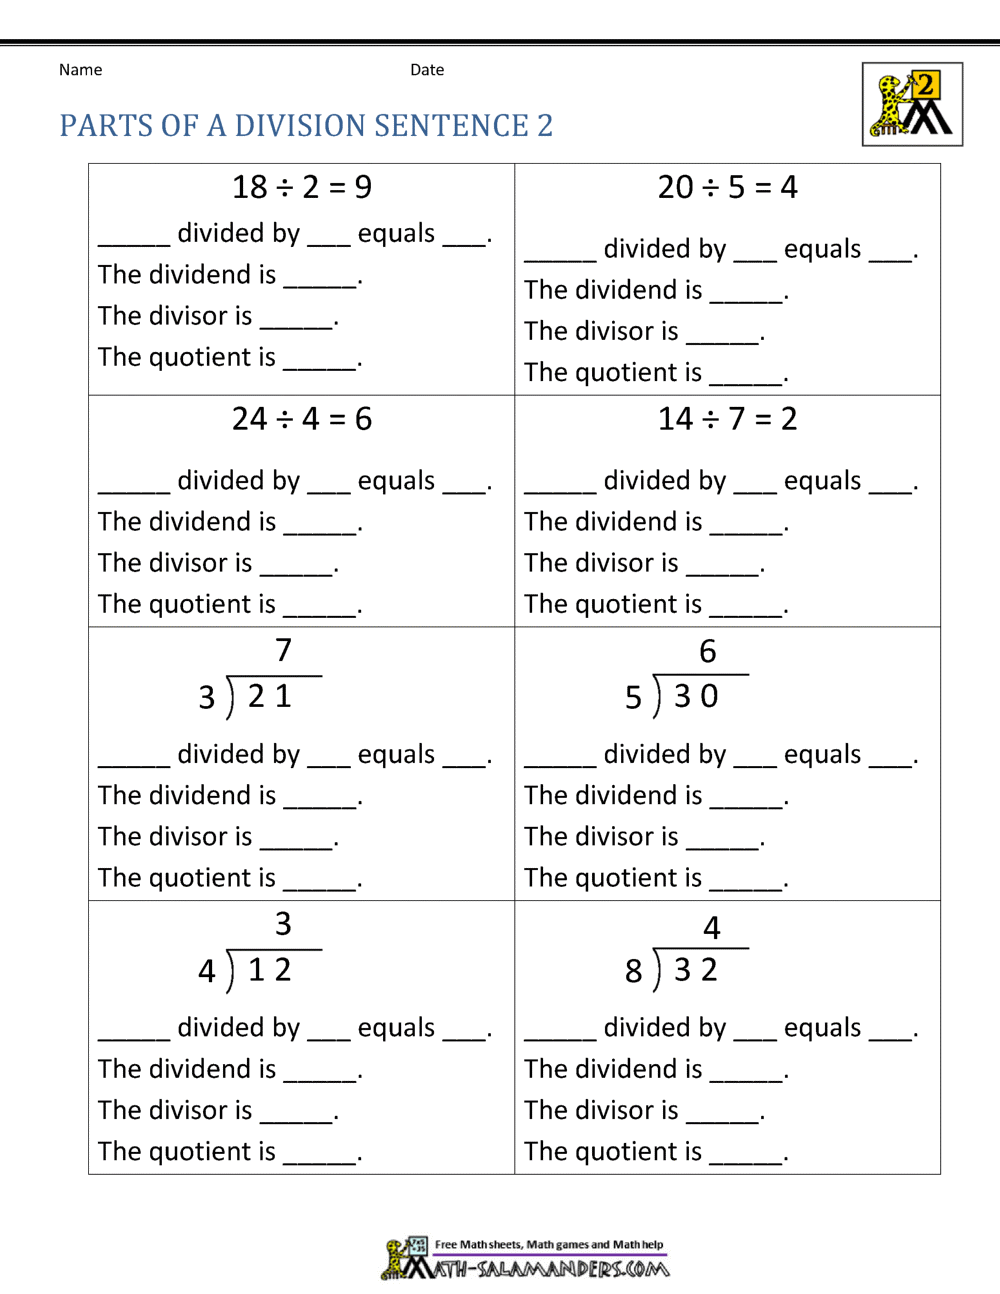 5-free-math-worksheets-second-grade-2-word-problems-amp